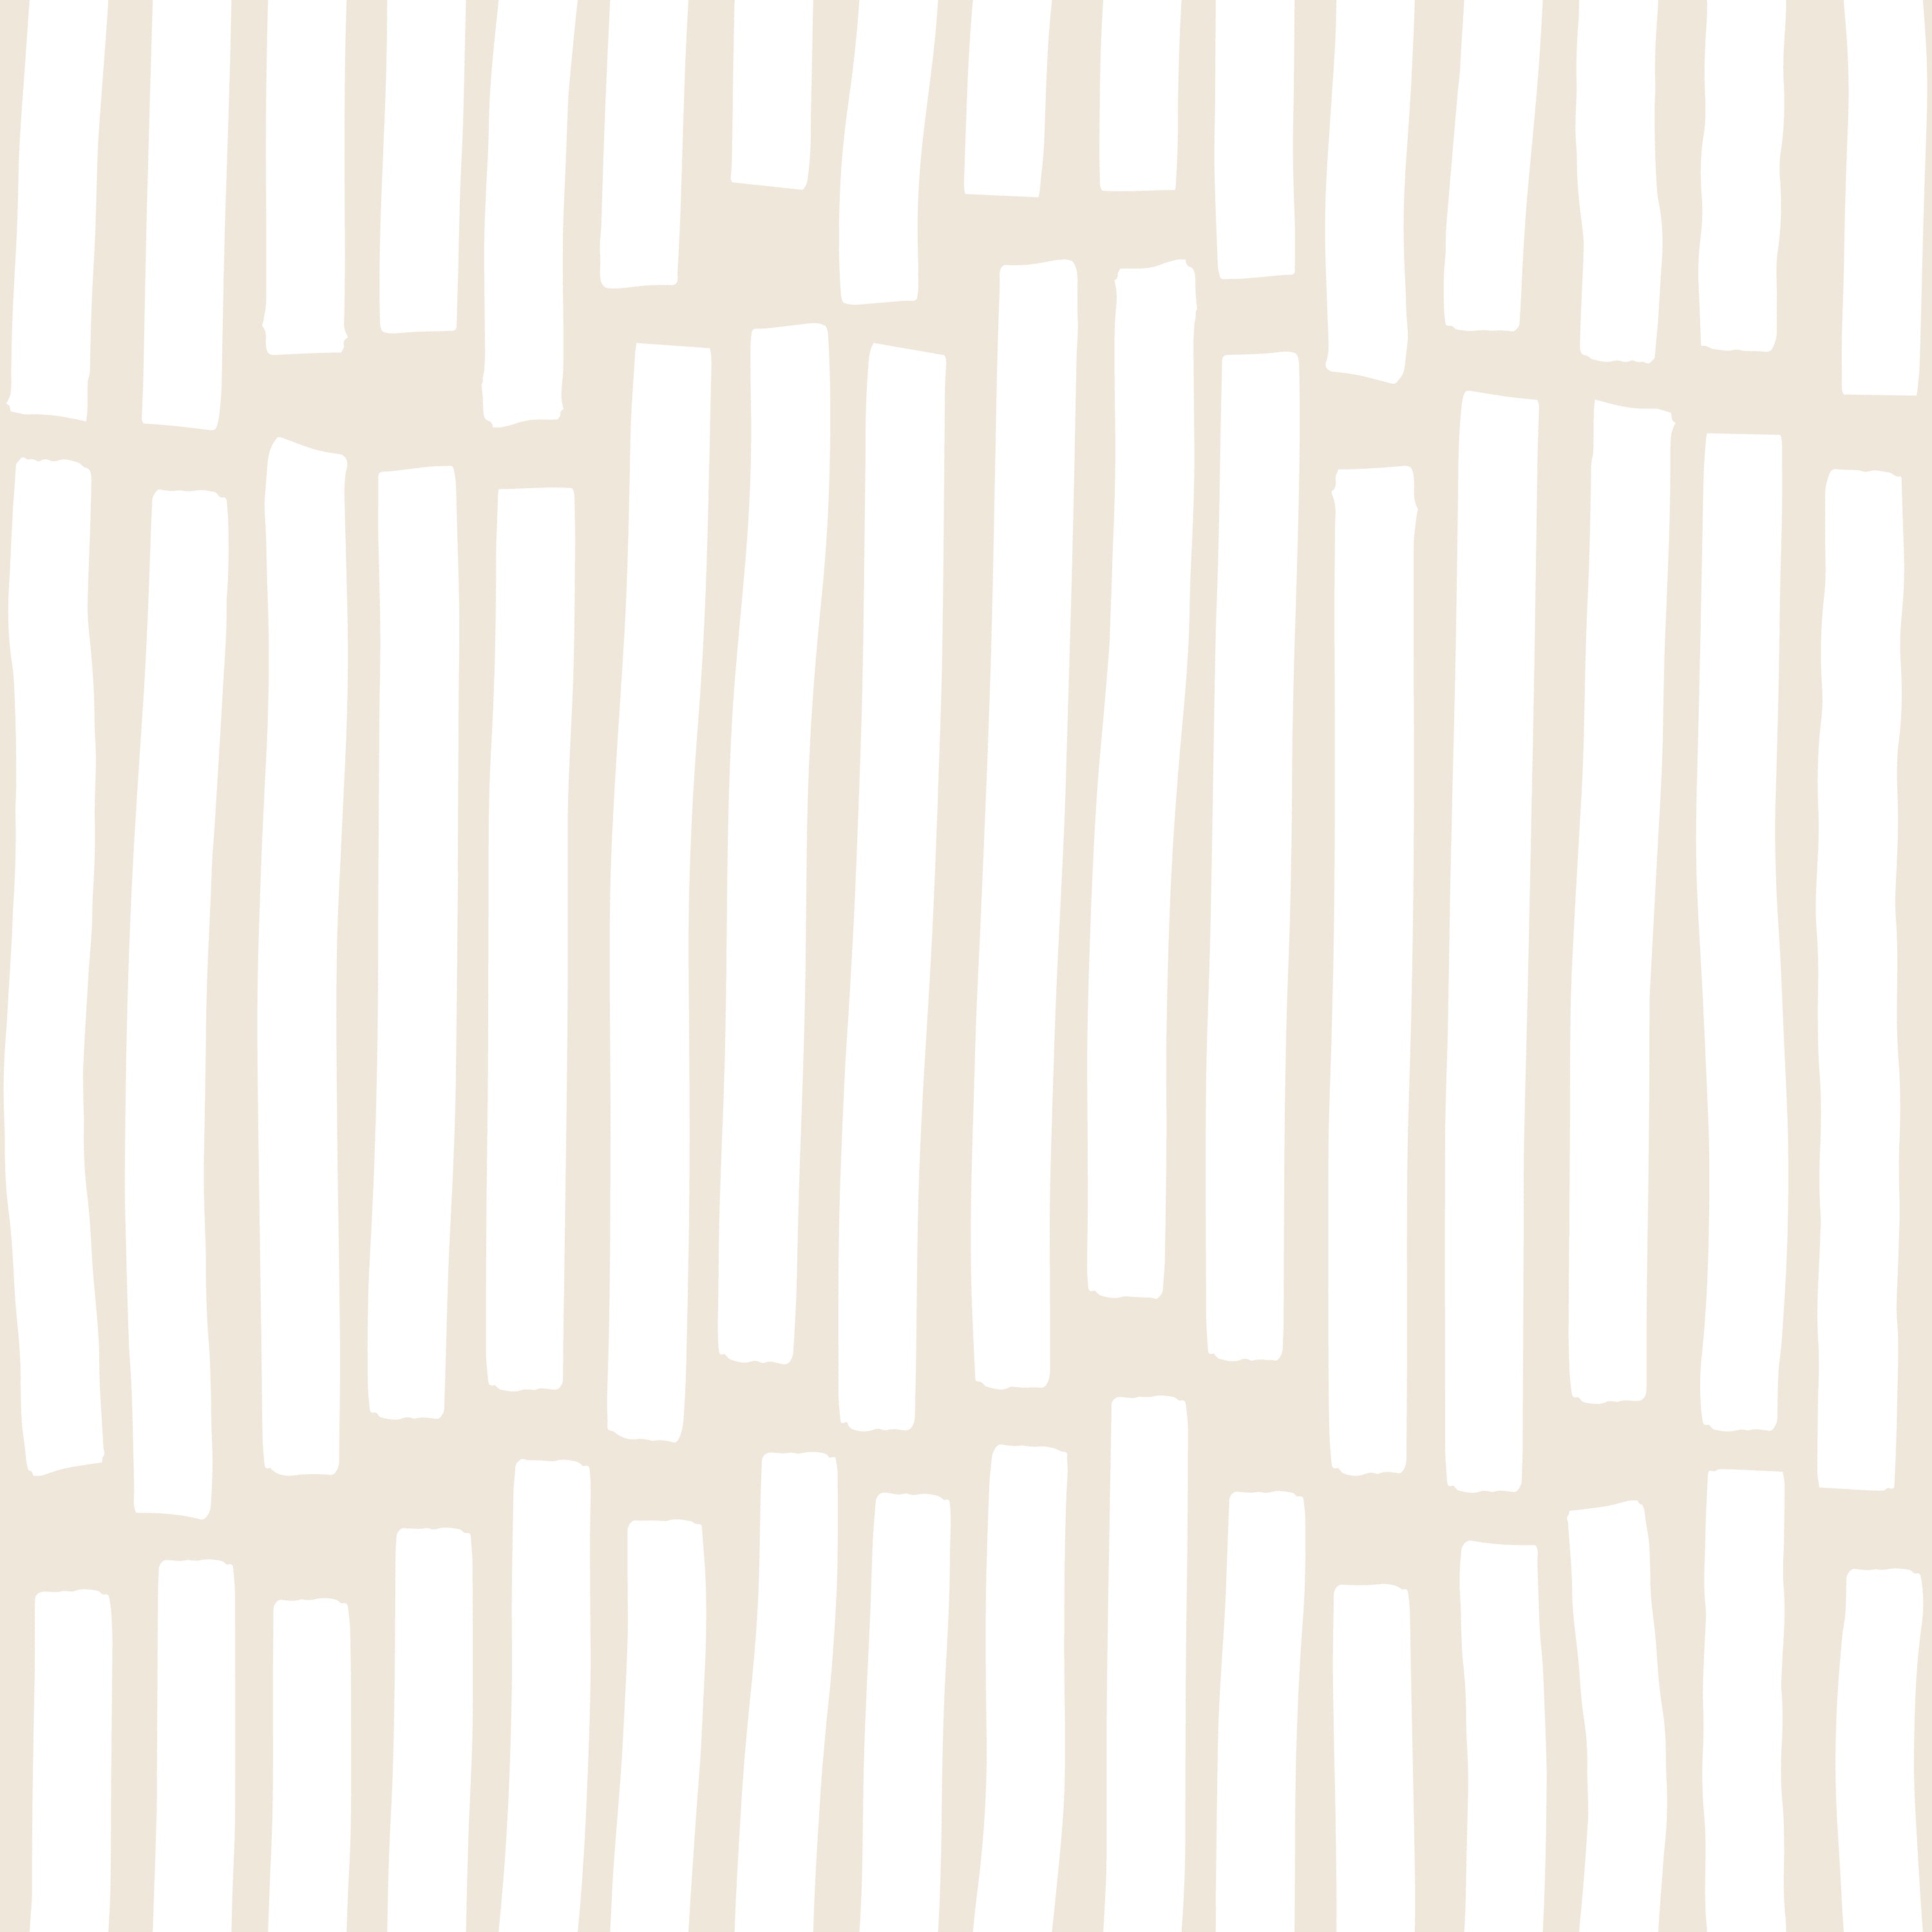 A close-up of the Boardwalk Wallpaper featuring a minimalist design with vertical and irregular beige lines on a cream background. The pattern offers a contemporary and clean aesthetic, ideal for modern decor.